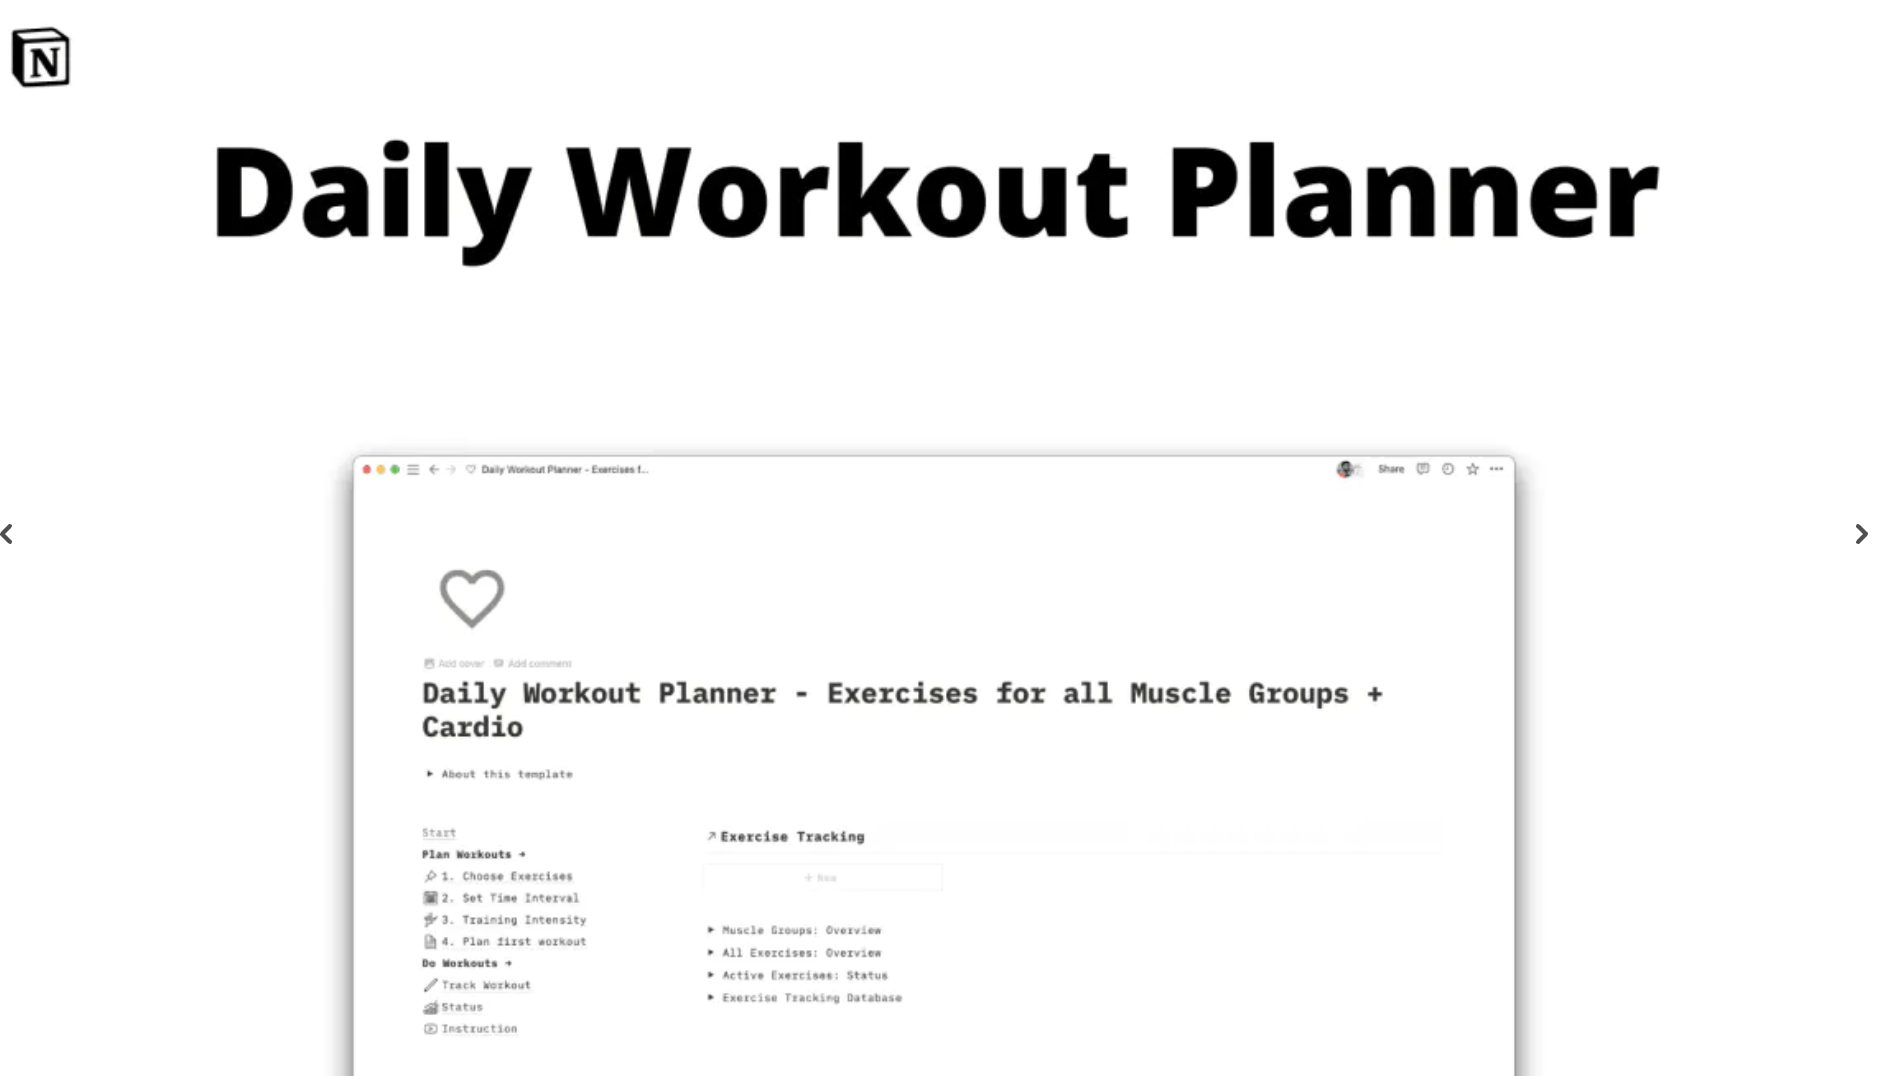 Daily Workout Planner in Notion - Exercises for all Muscle Groups + Cardio